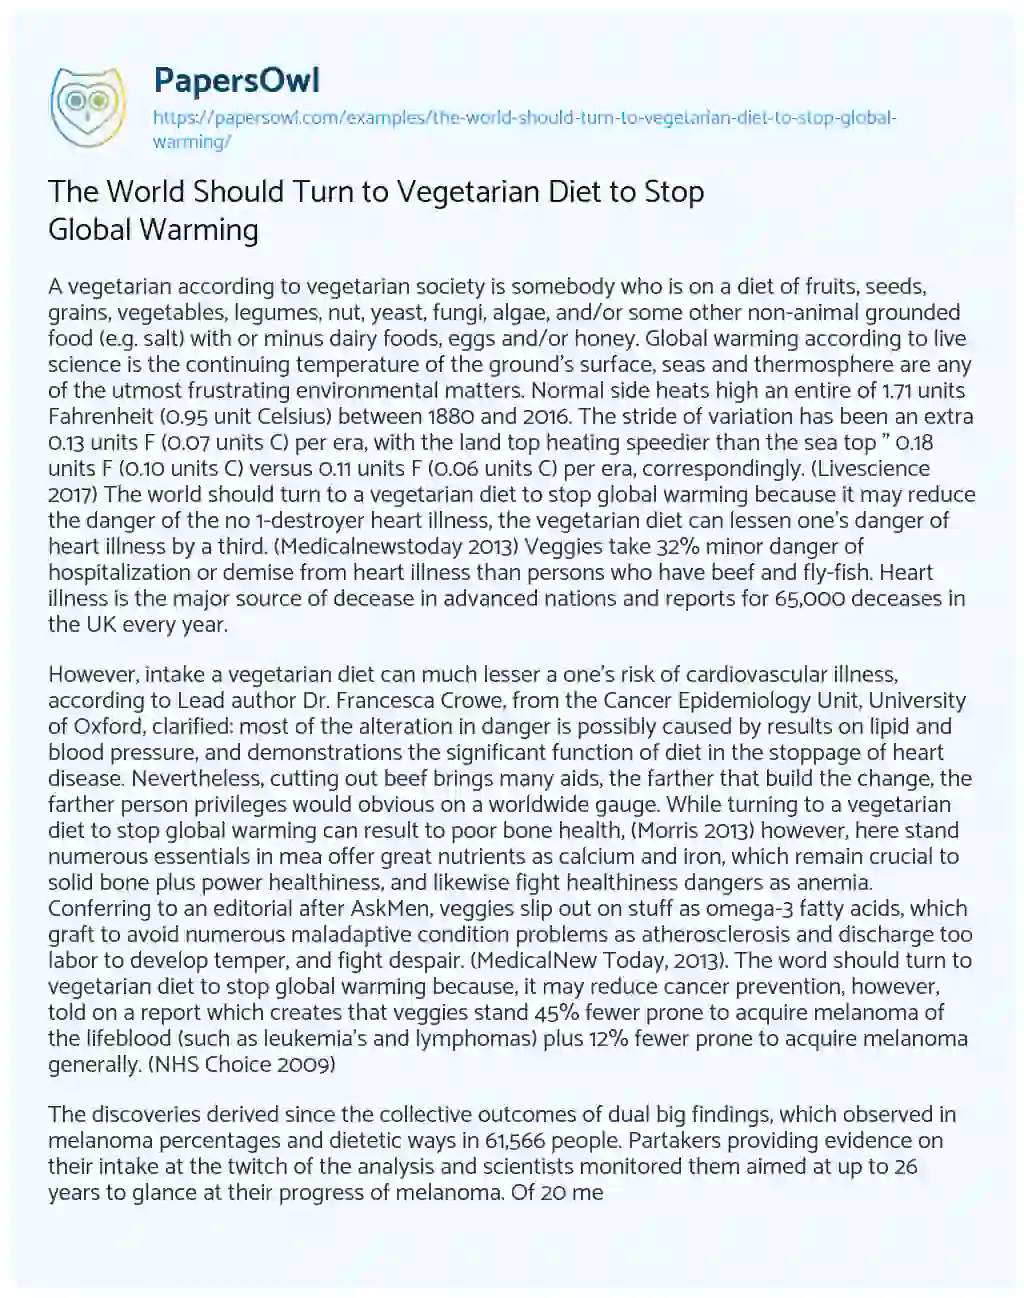 The World should Turn to Vegetarian Diet to Stop Global Warming essay